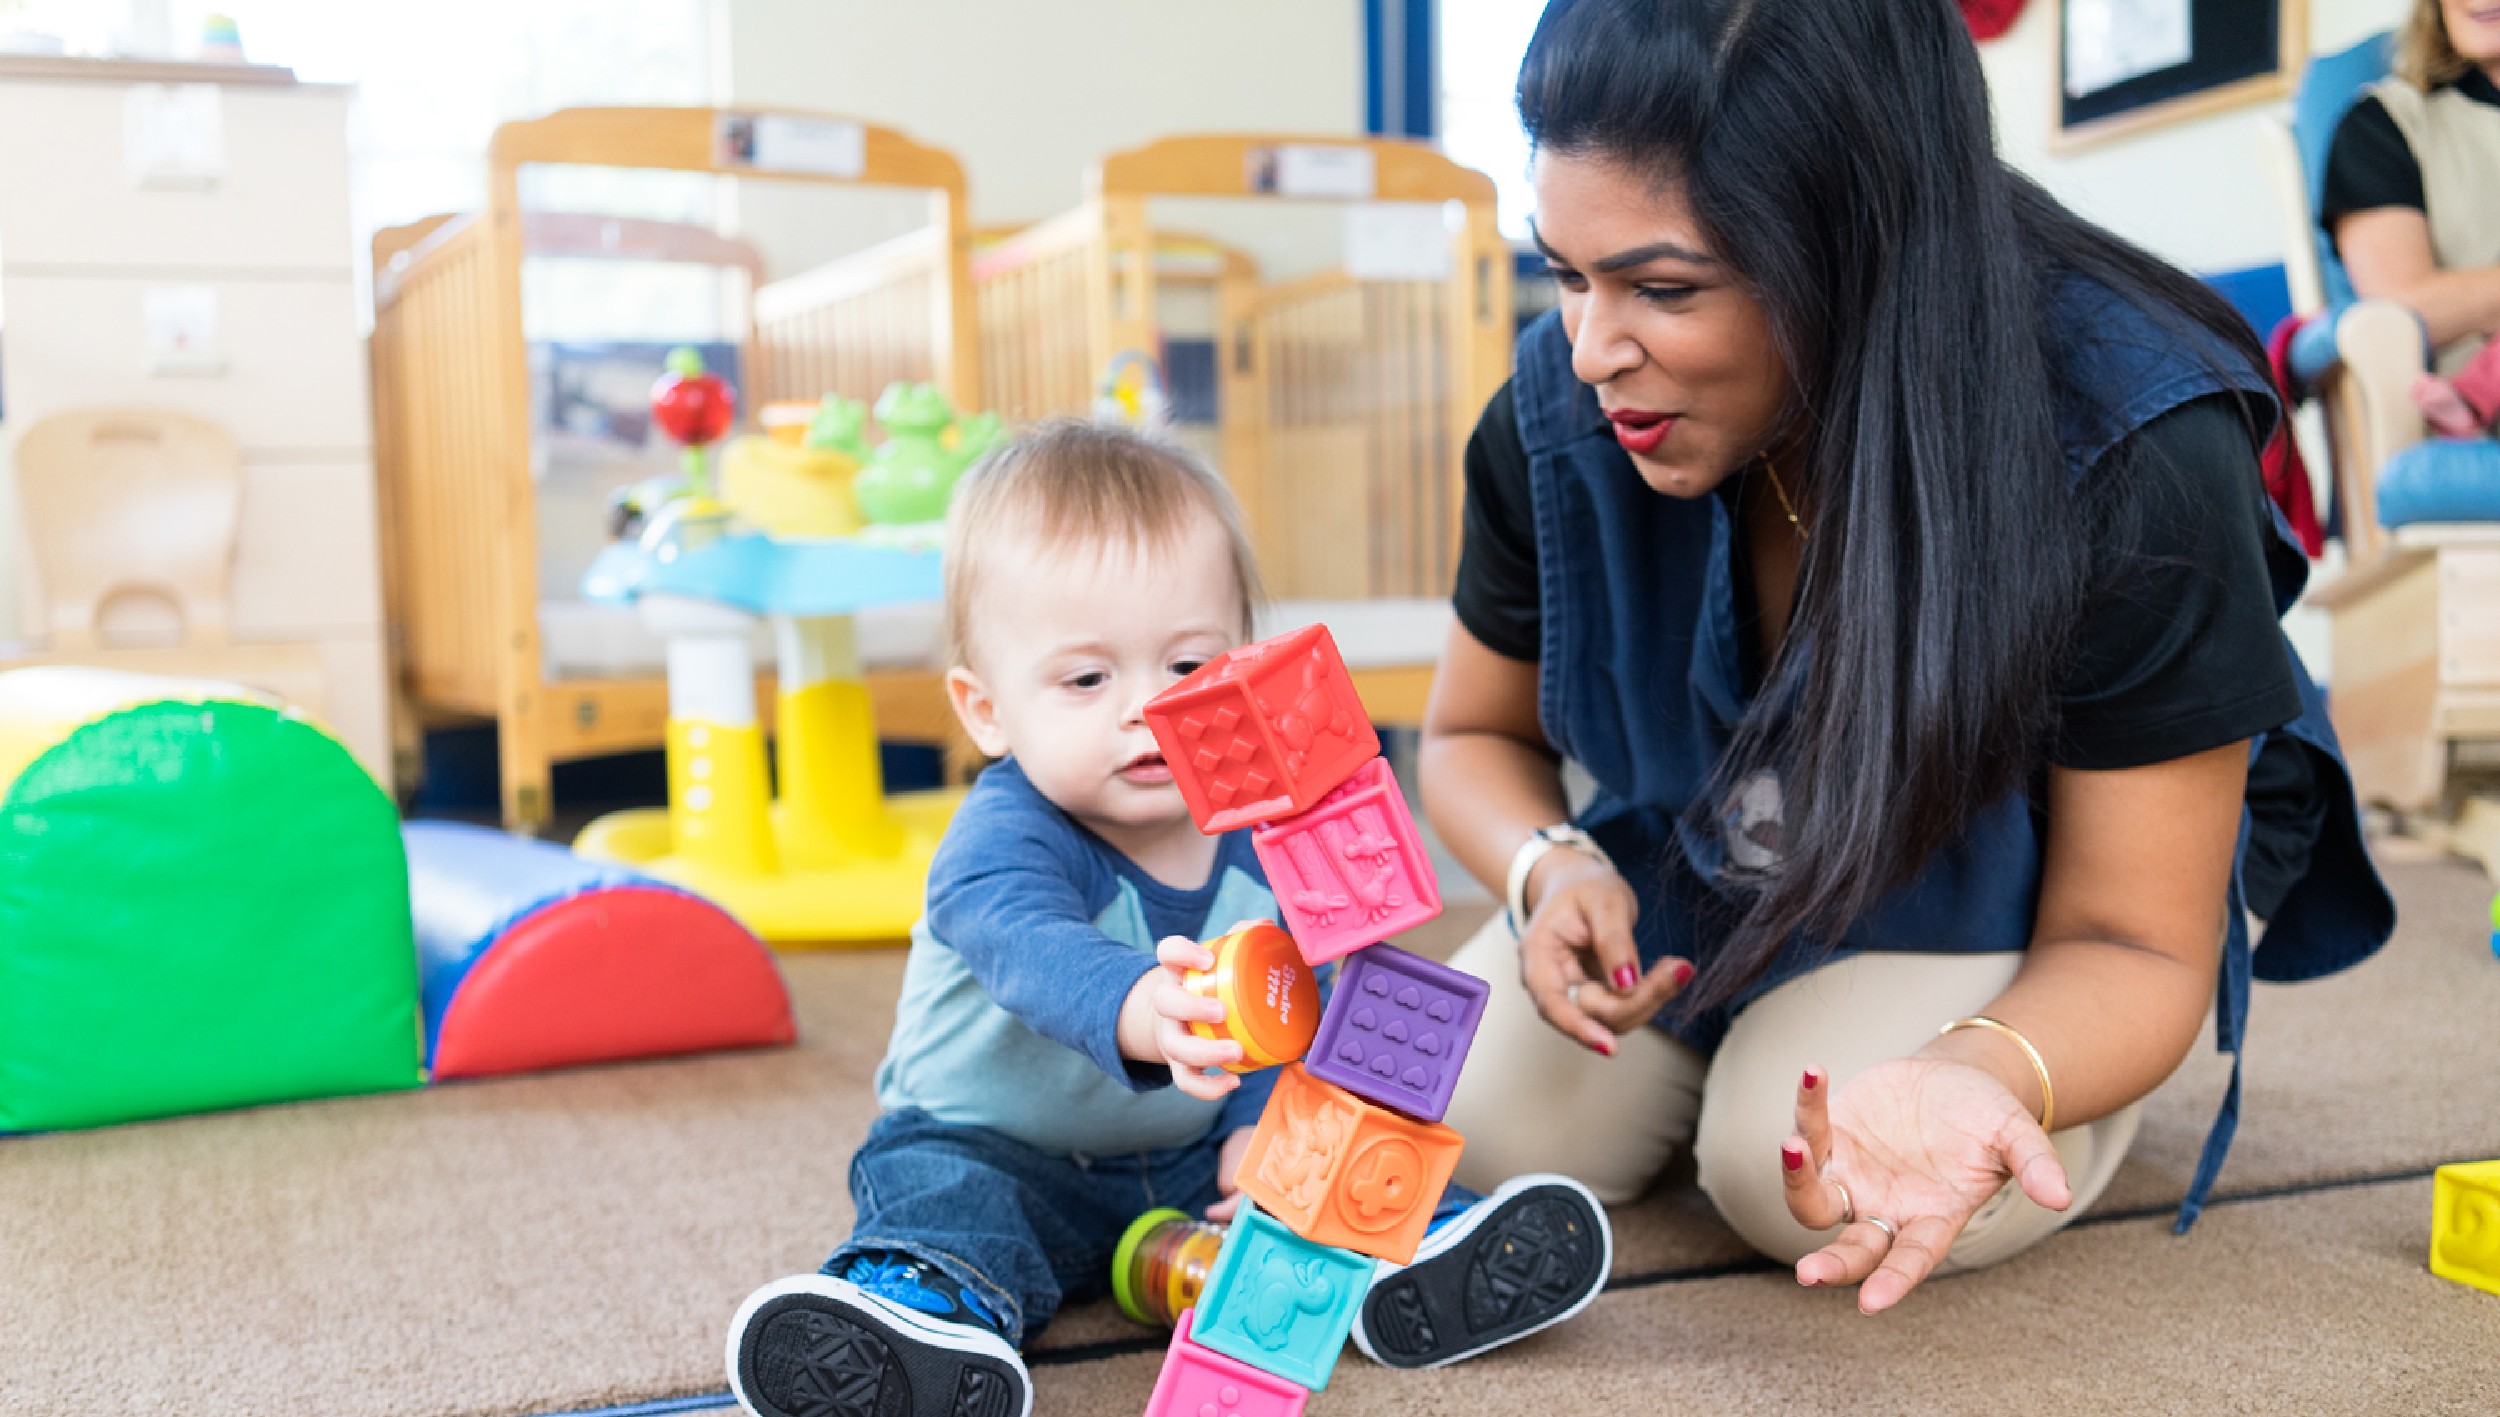 ASQ® is commonly used by pediatricians and is supported by the American Academy of Pediatrics for the developmental screening of young children’s learning gains holistically.